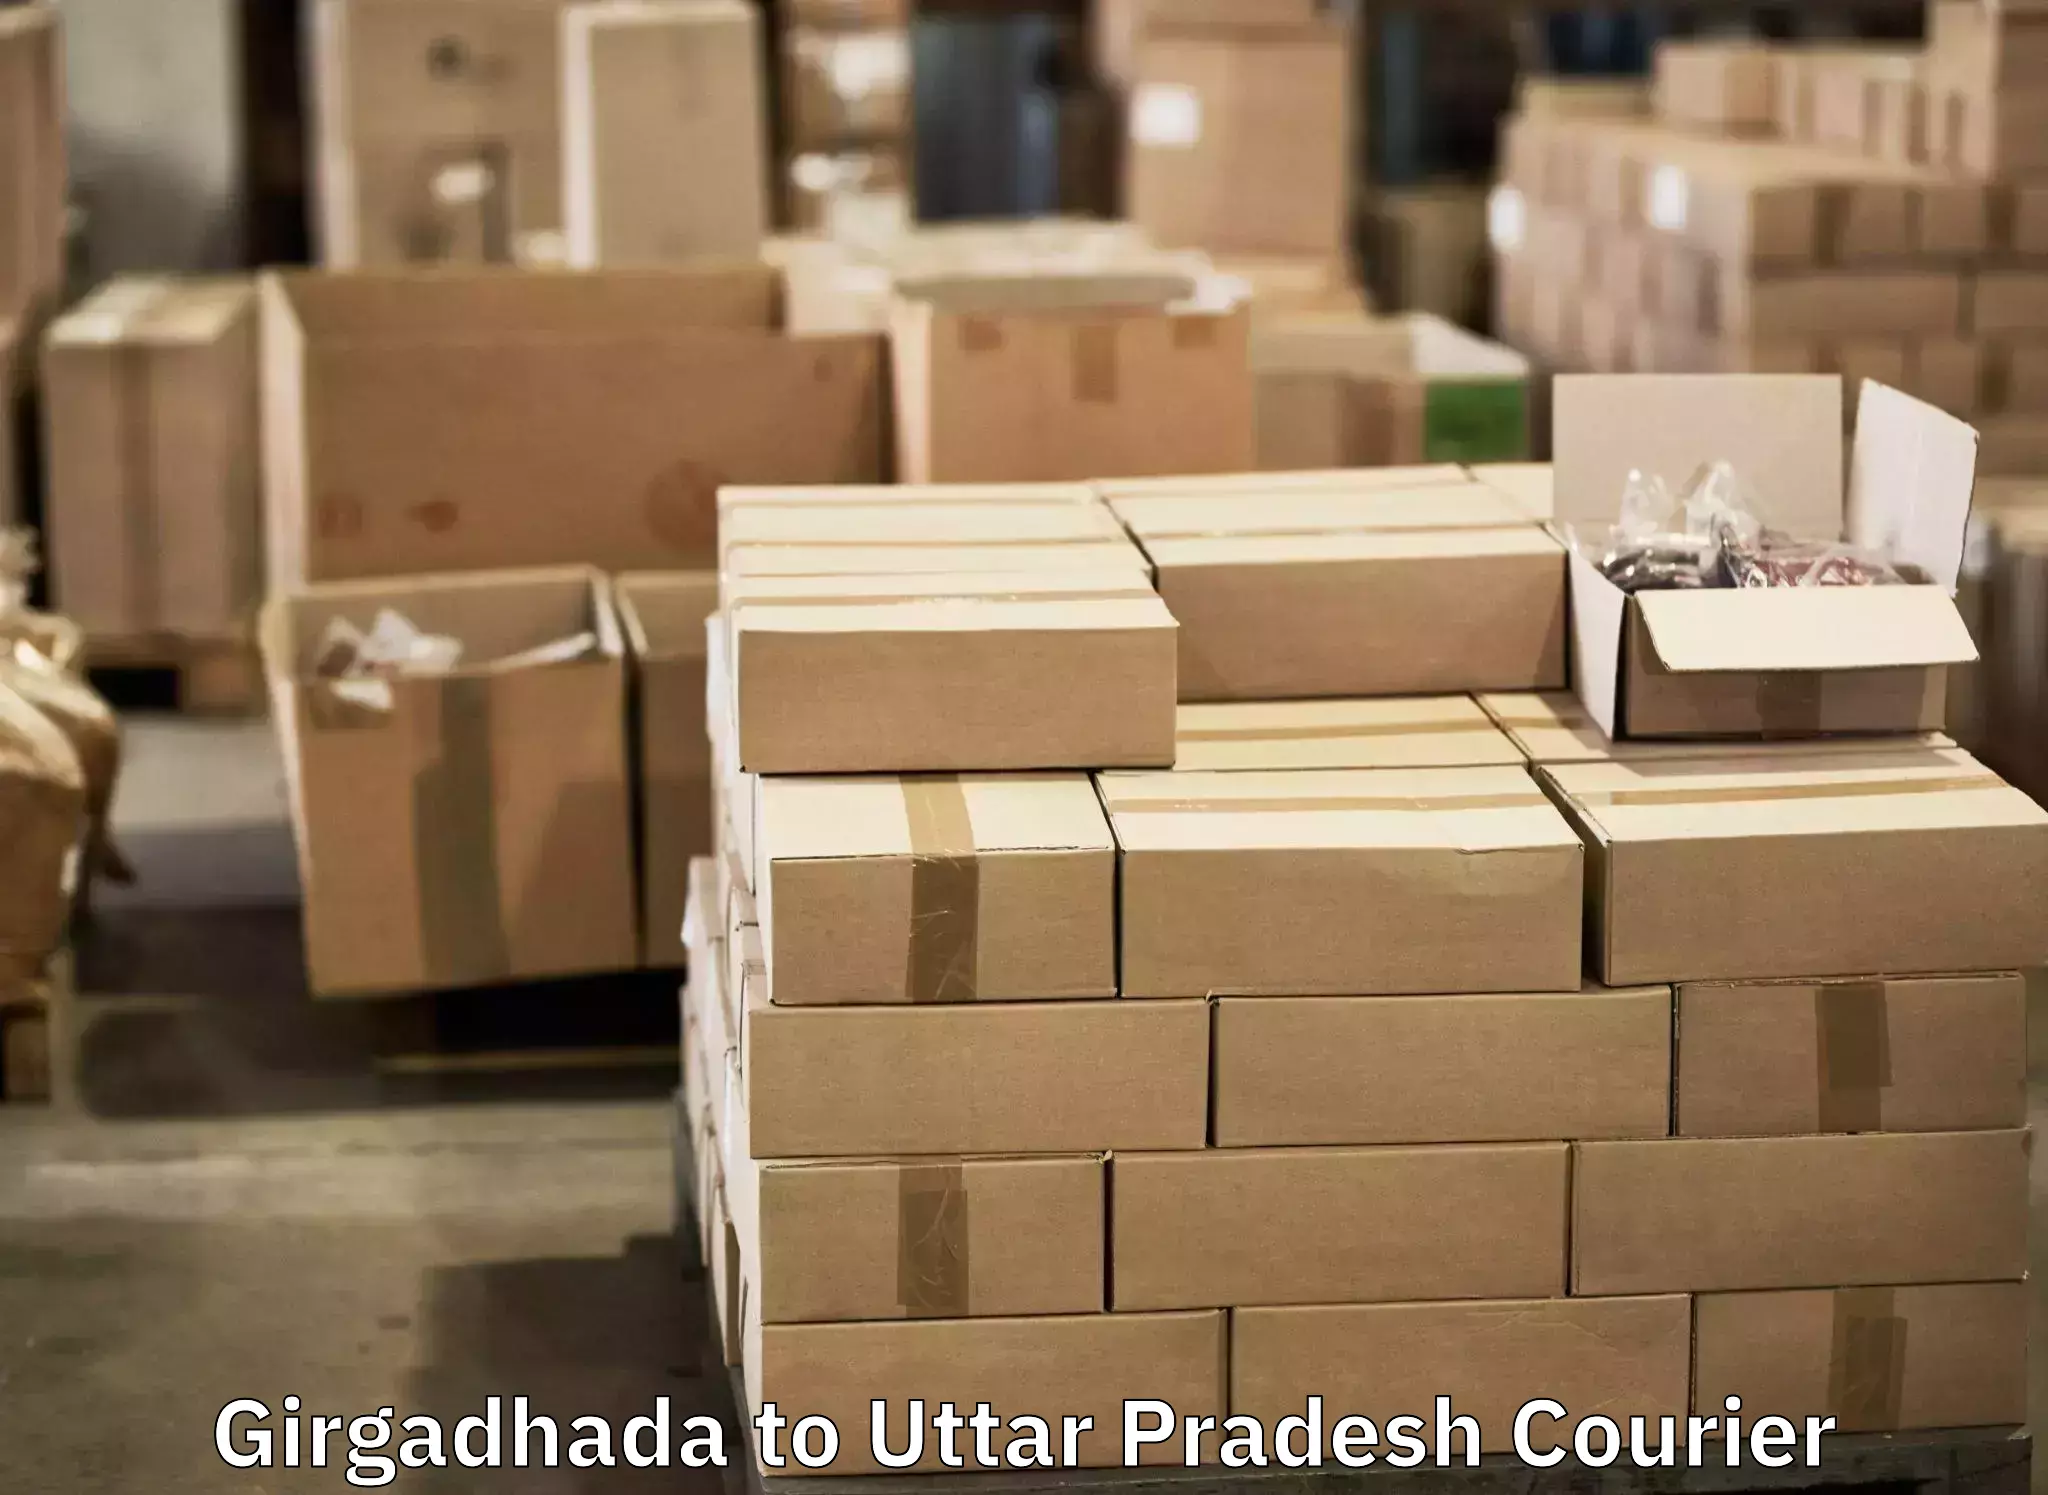 Baggage shipping experts Girgadhada to Sultanpur